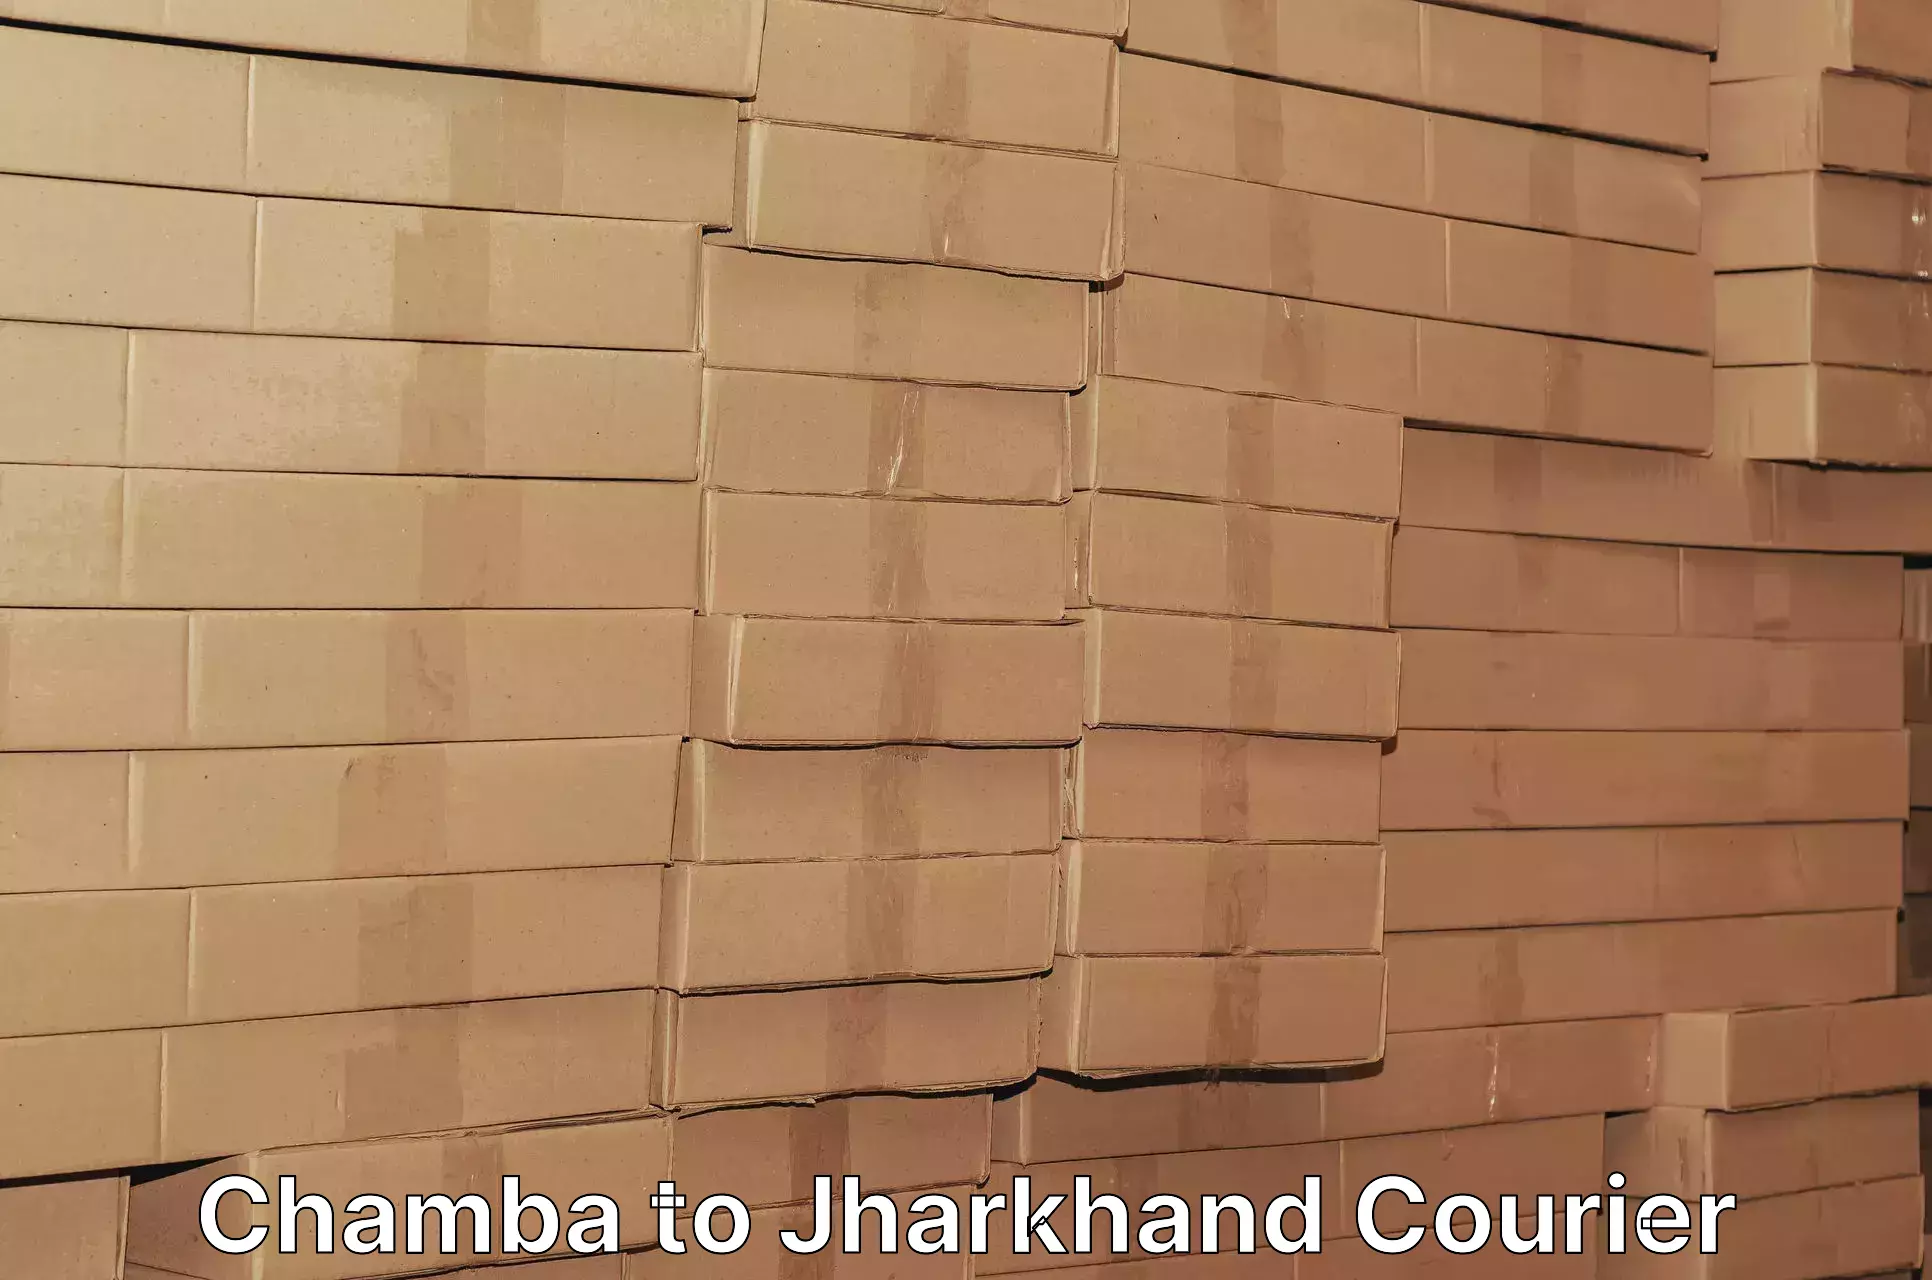 Advanced parcel tracking Chamba to Jamshedpur